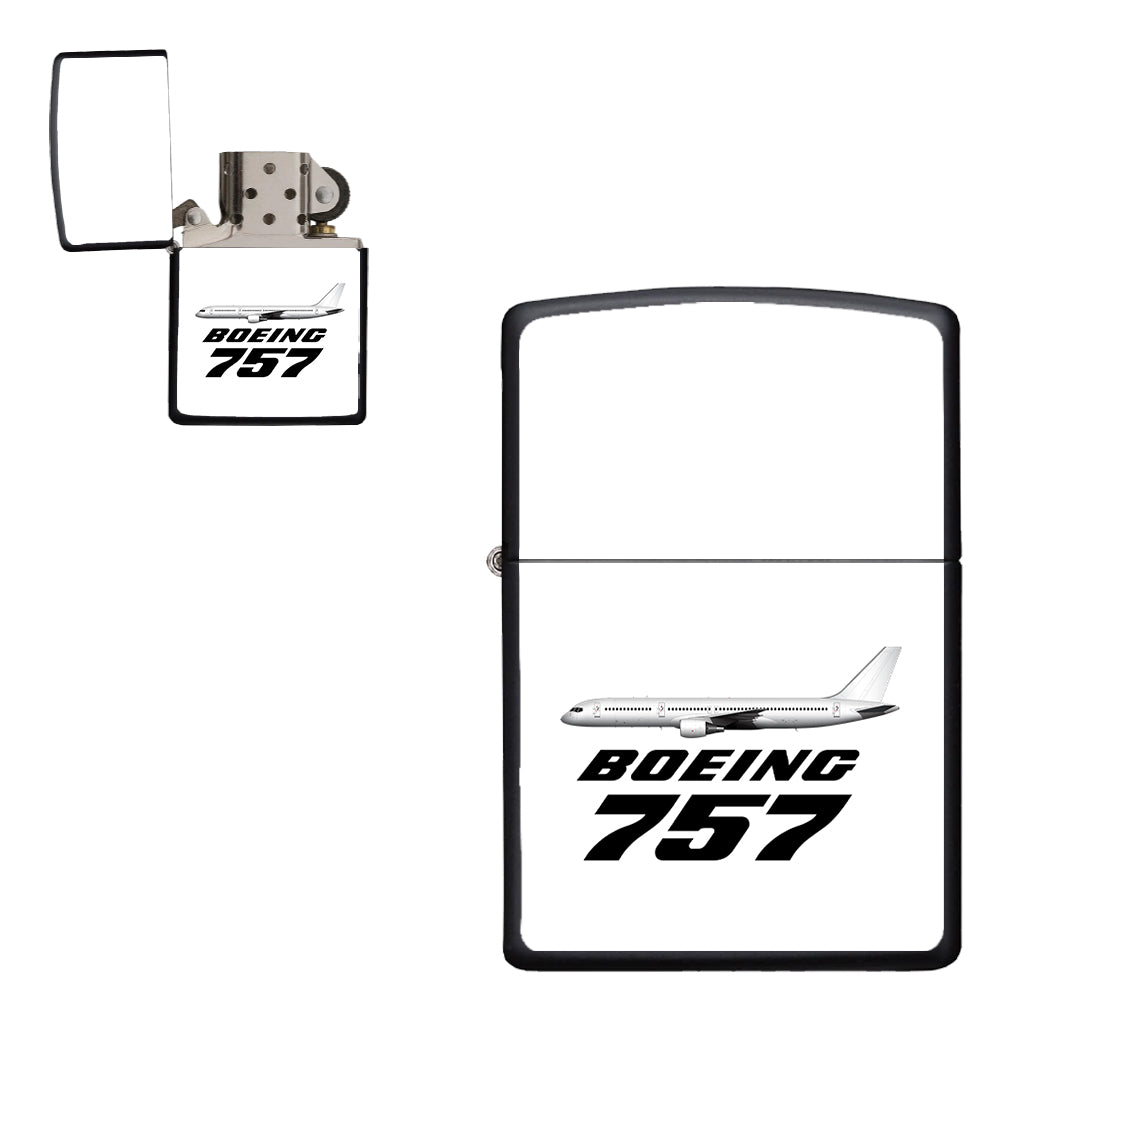 The Boeing 757 Designed Metal Lighters